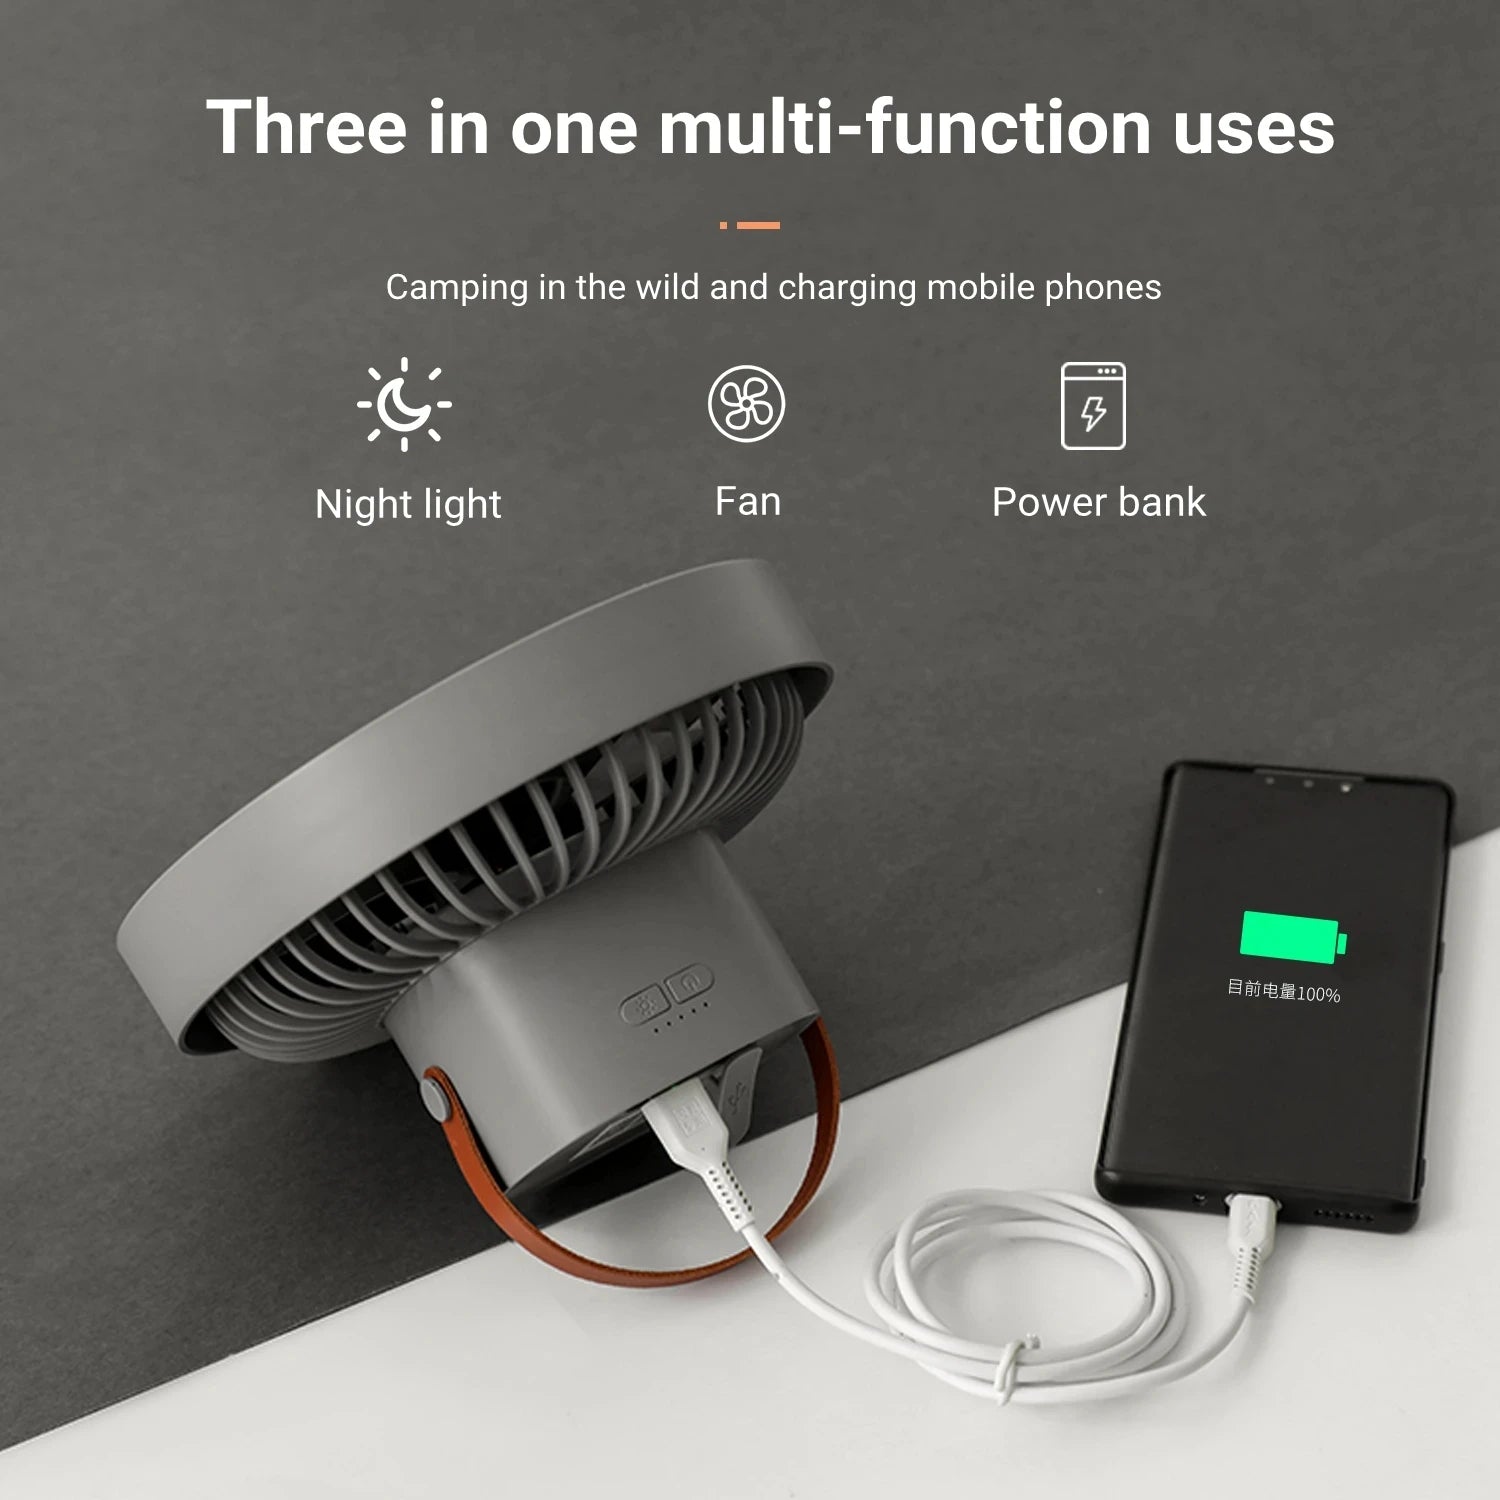 10000mAh Rechargeable Portable Fan Ventilador Usb Auto Rotation Standing Fans Stand Cooler Desk Ceiling for Outdoor Camping